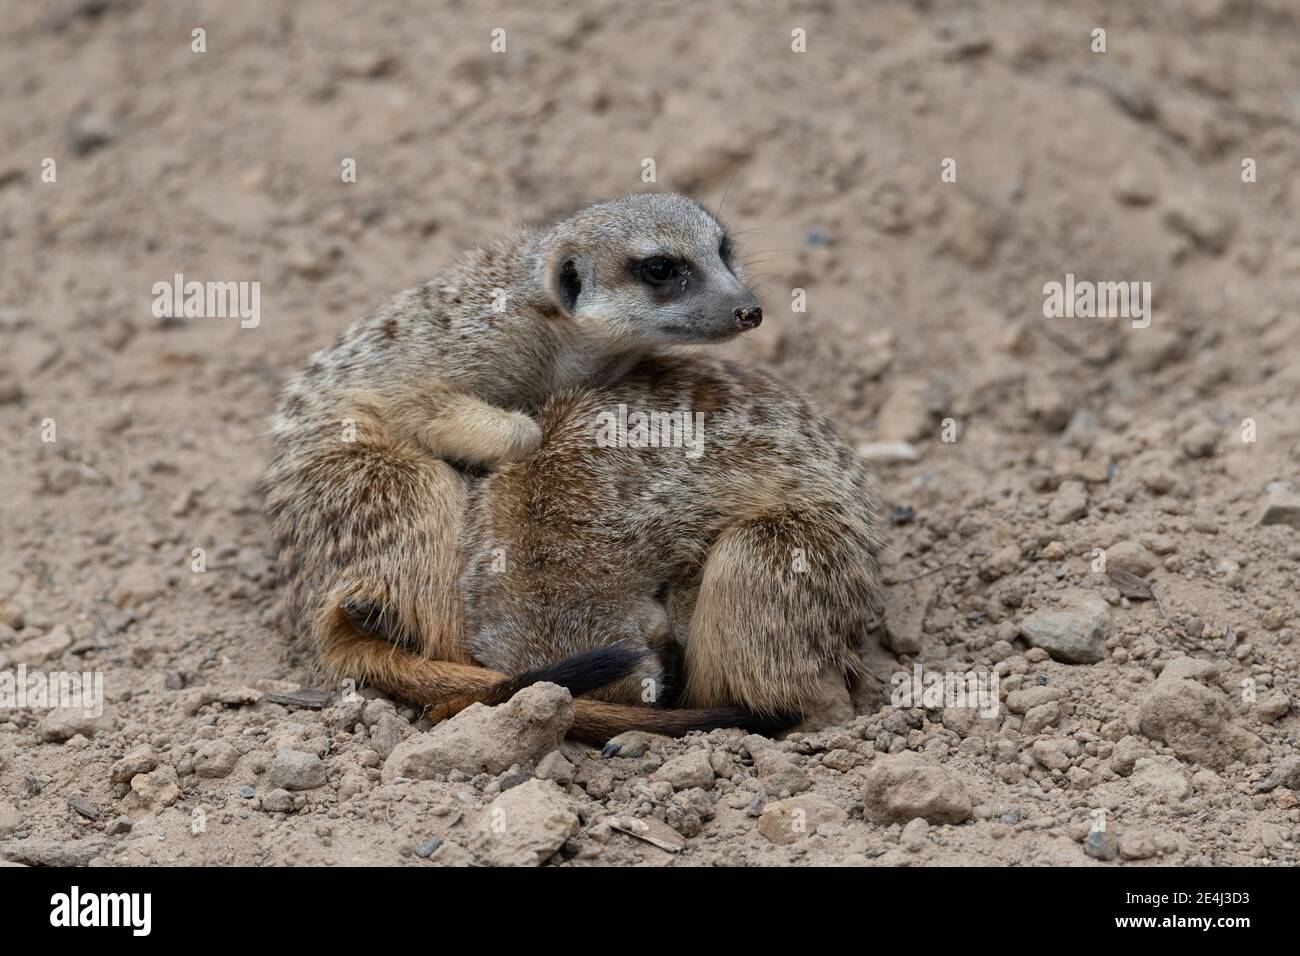 Two Meerkat cuddling for warmth, one meerkat curled up and the other meerkat being alert for threats, looking about Stock Photo